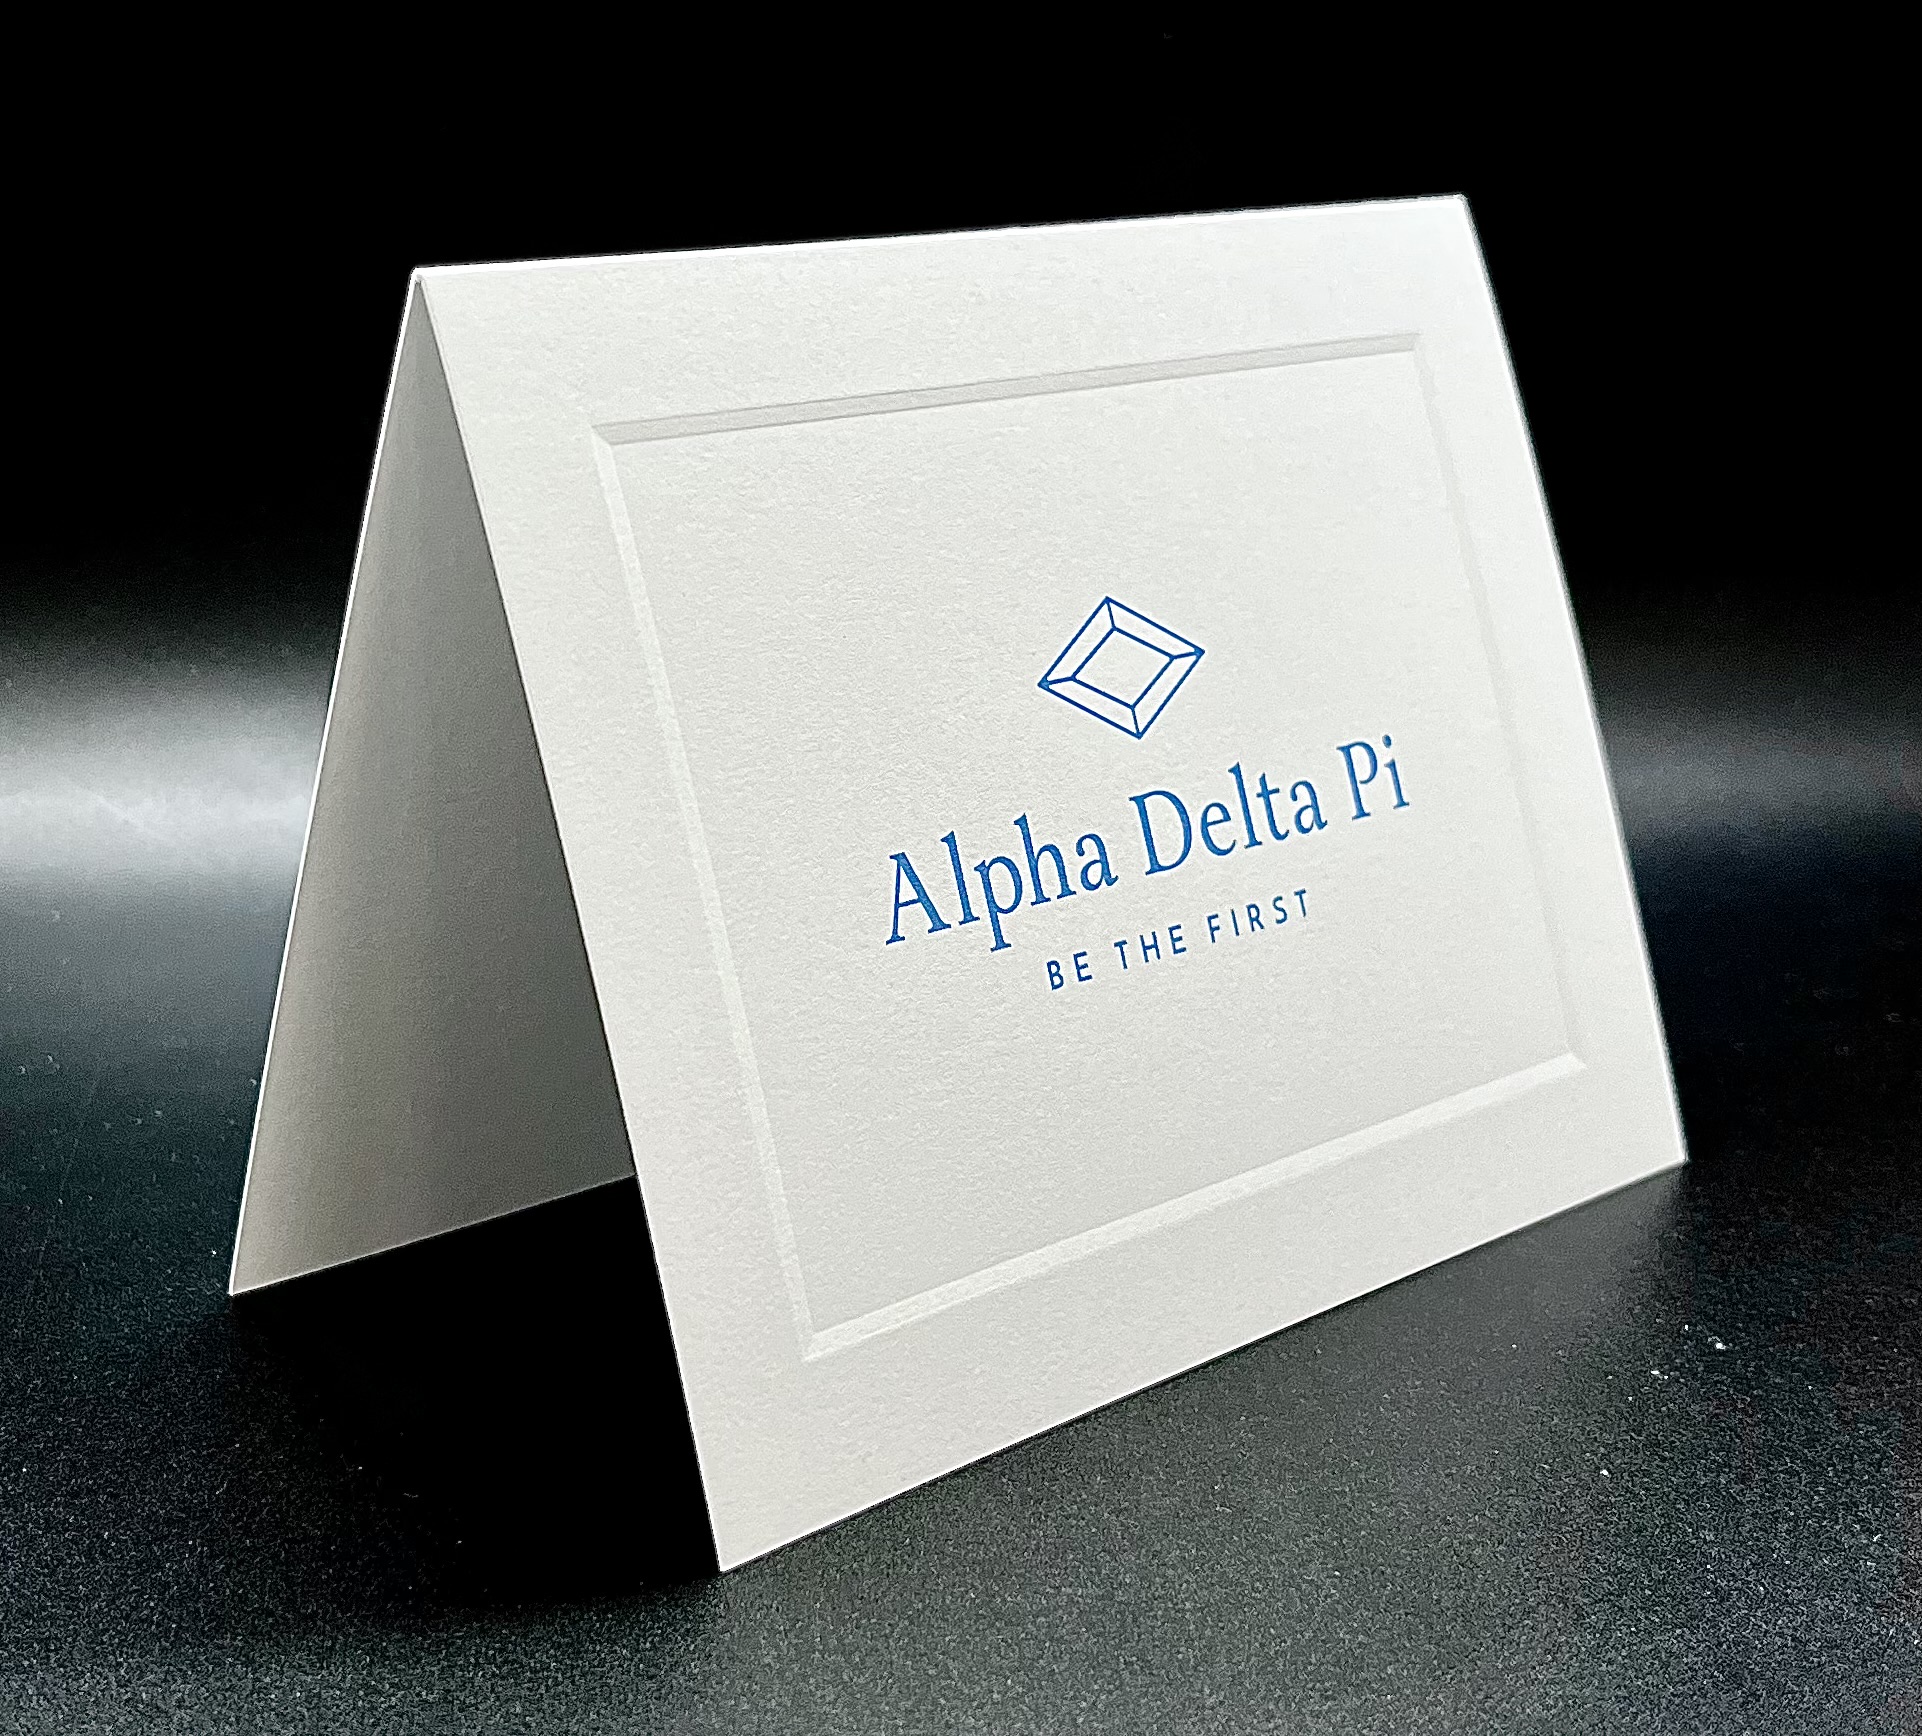 Official Notecards With New Graphic Standard Alpha Delta Pi